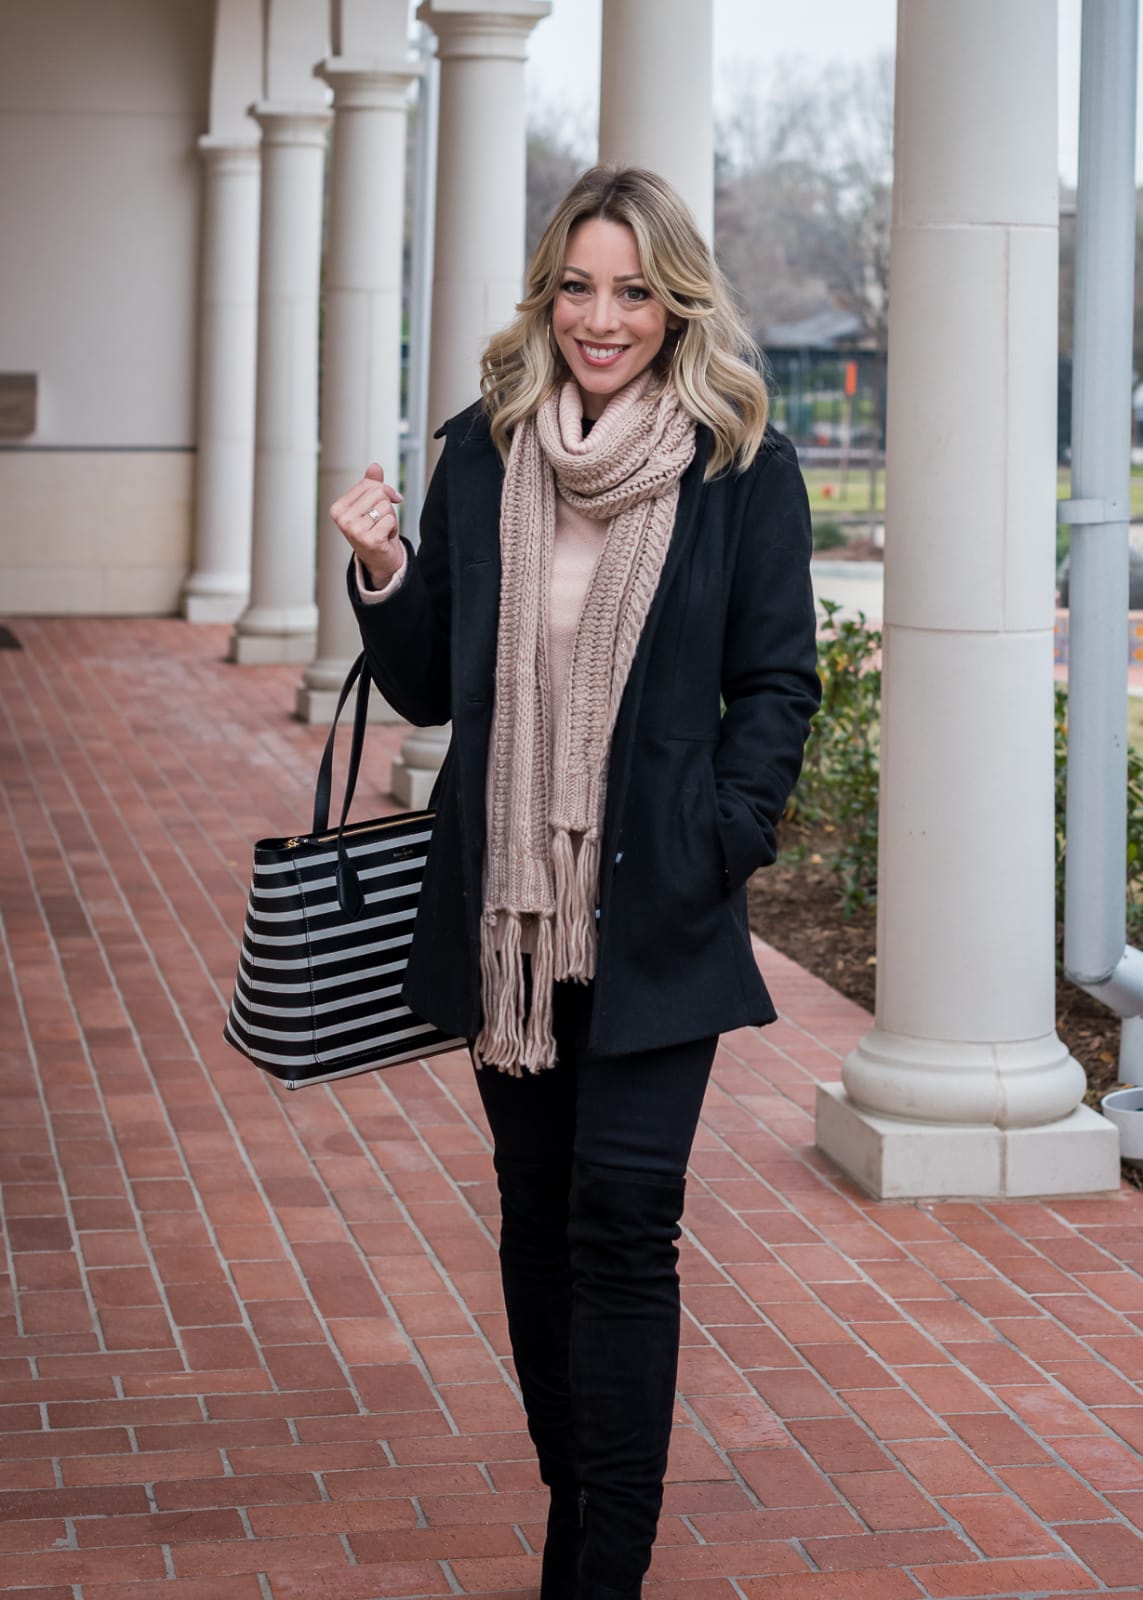 Cute winter outfit with peacoat and pink scarf